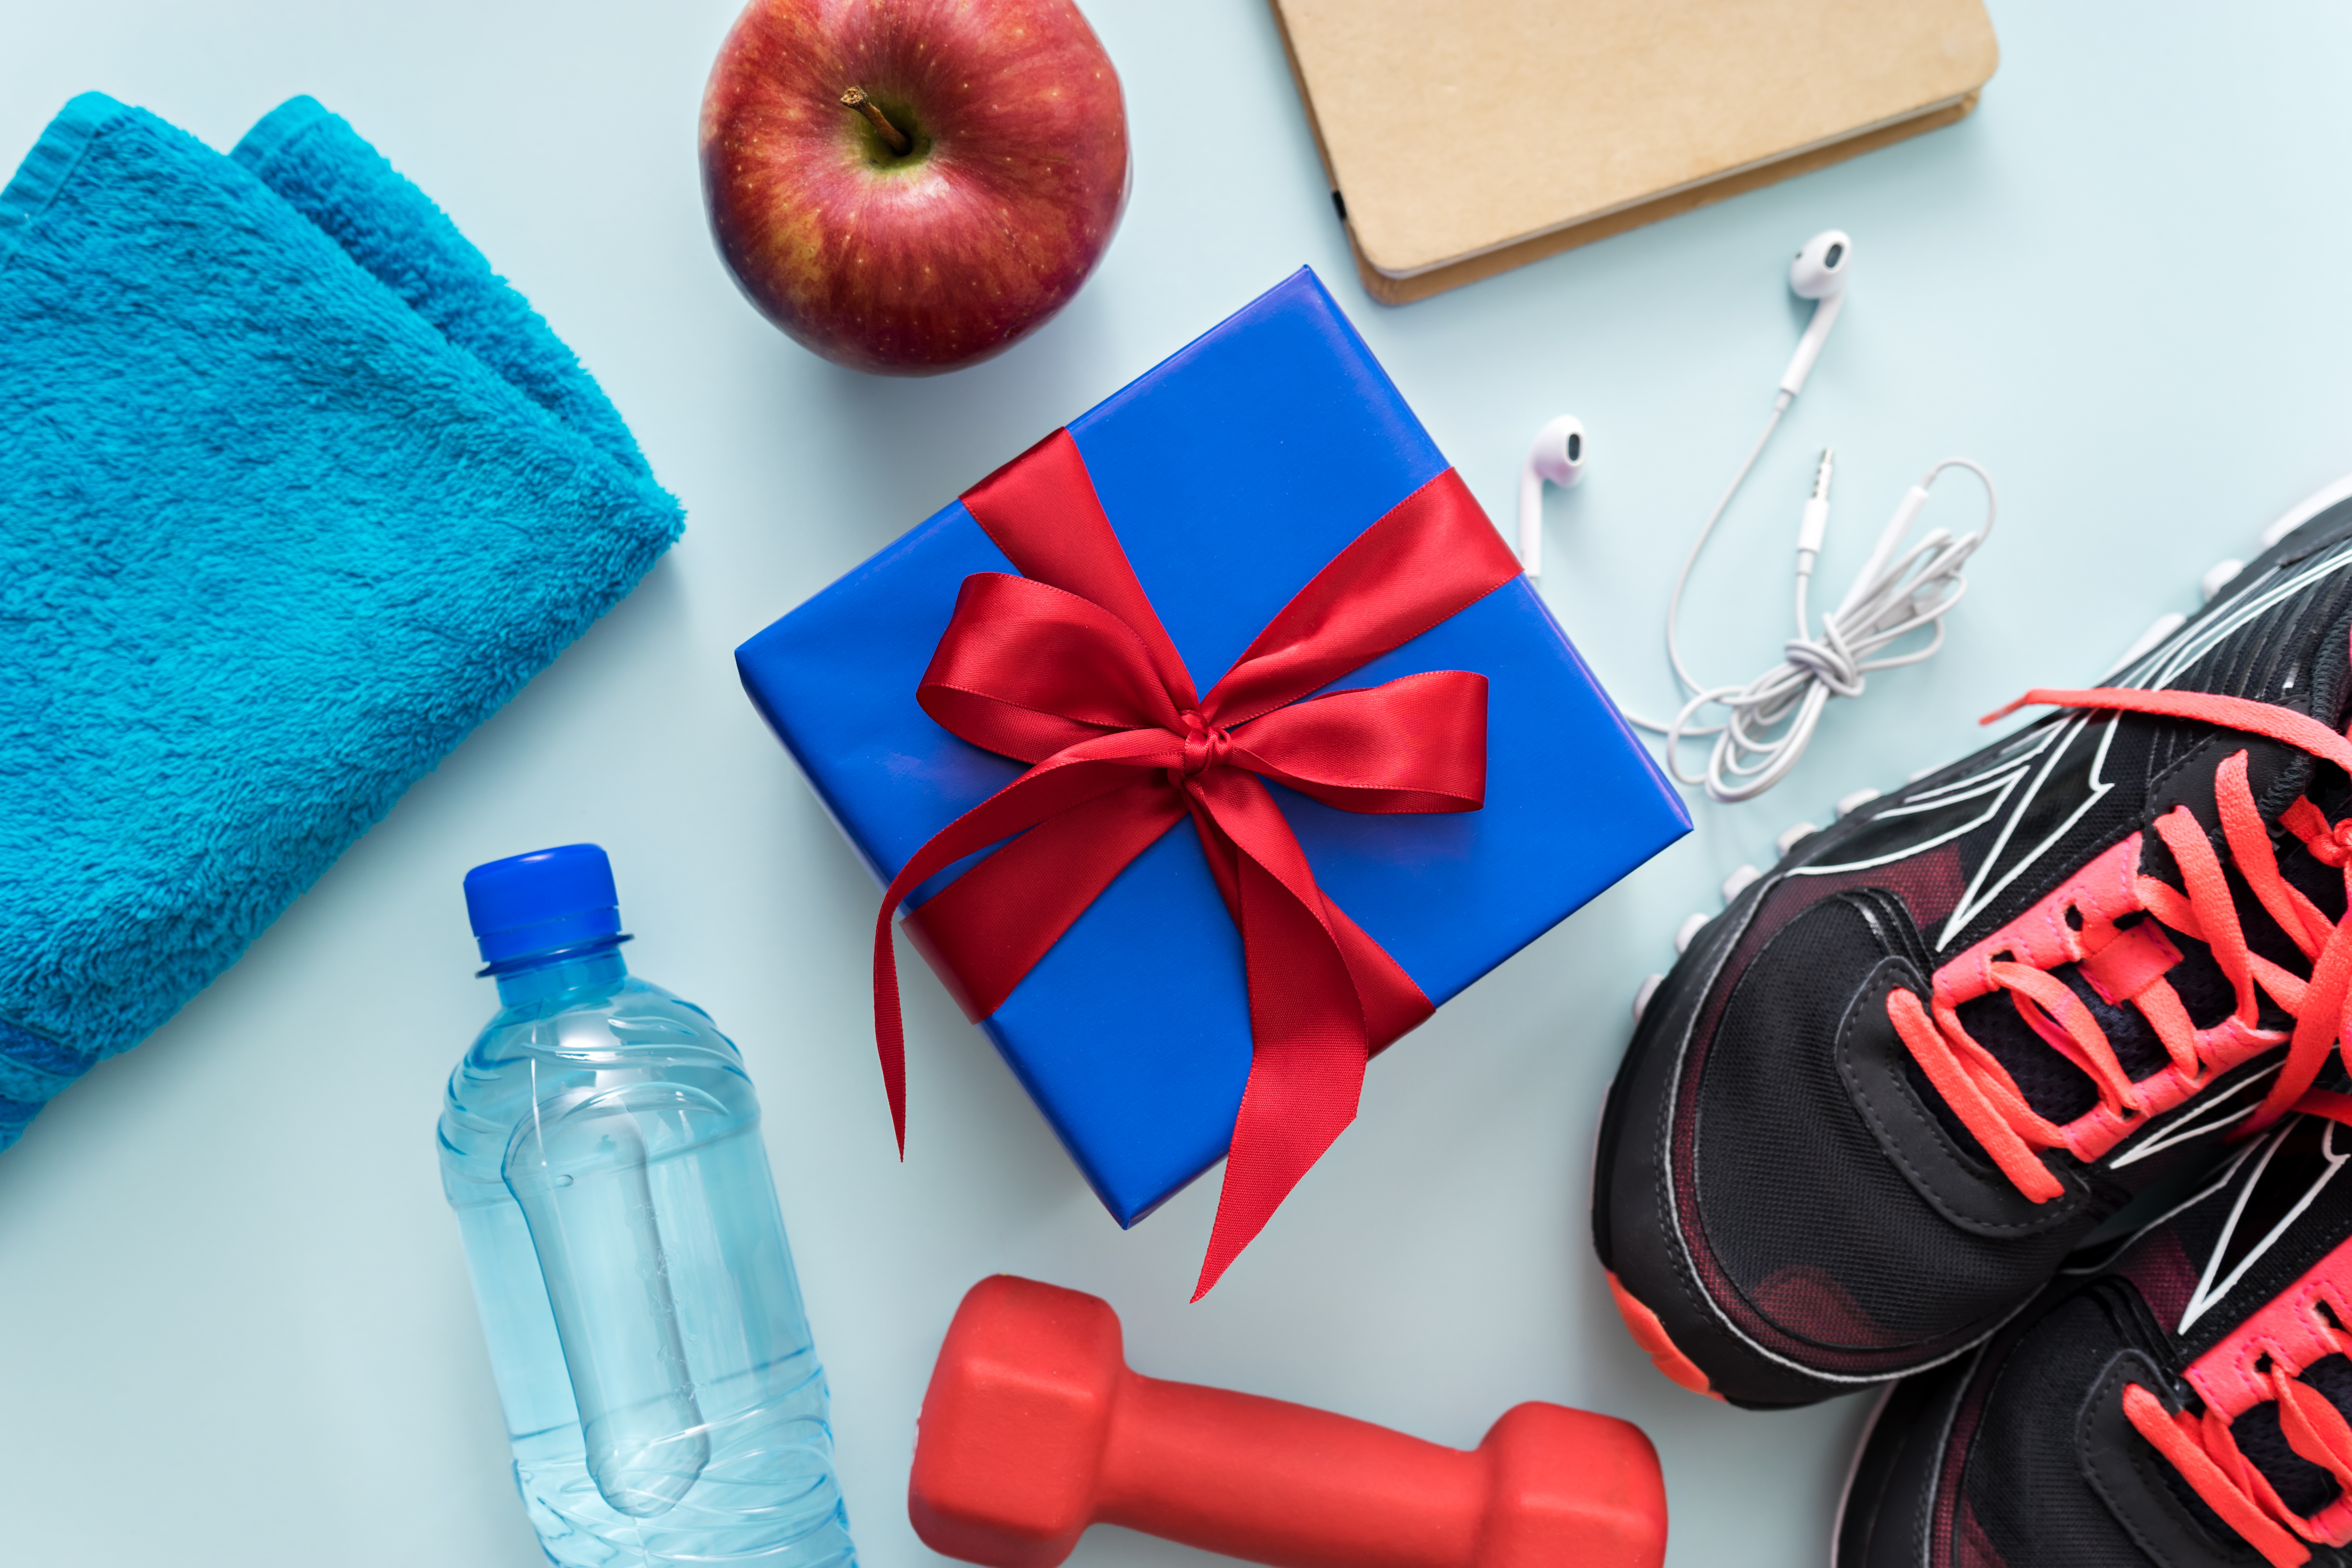 A present sits next to fitness equipment, including sneakers, weights, and headphones.